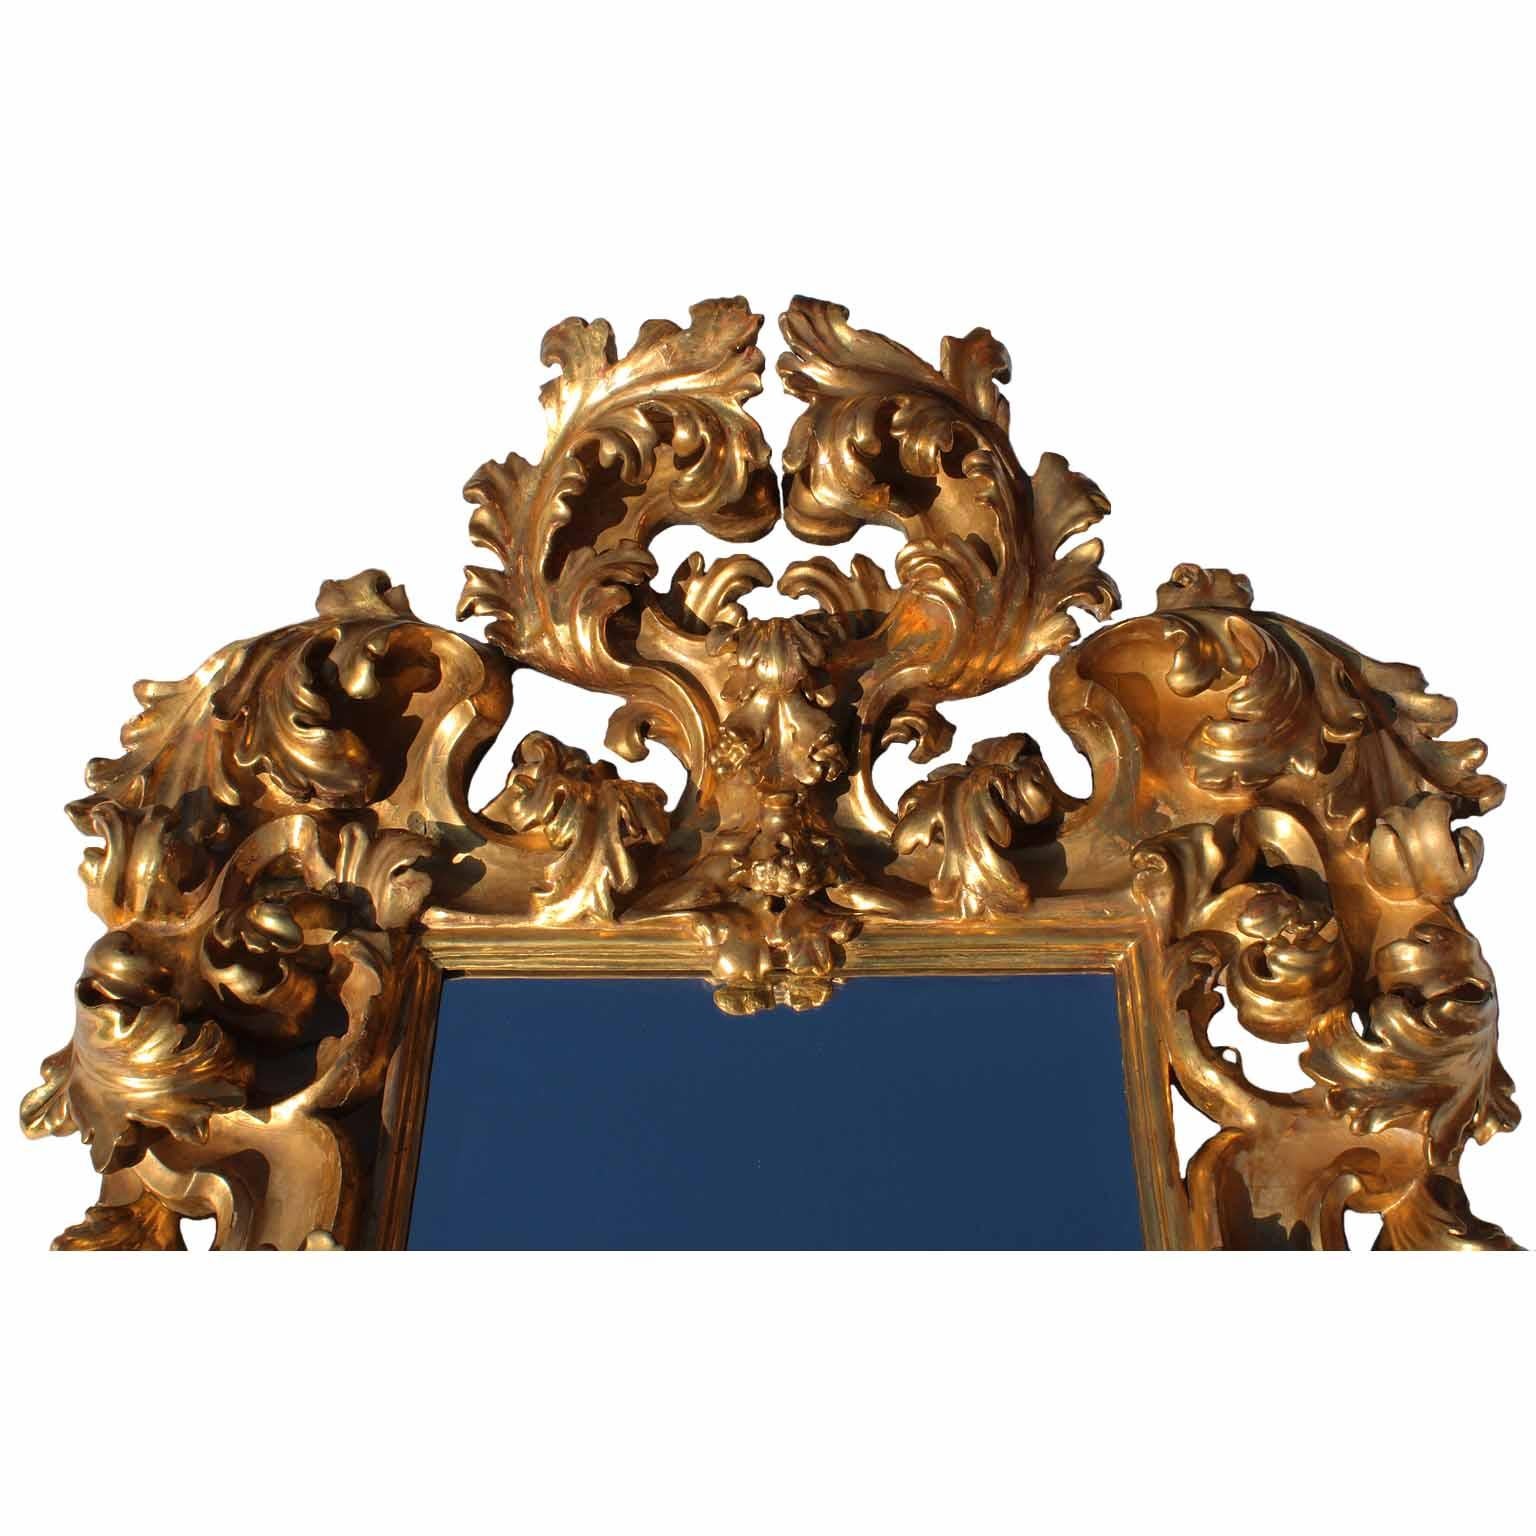 A palatial and museum quality Italian 19th century Florentine Rococo giltwood carved mirror frame. The ornately carved frame with scrolls and acanthus, all gilt is original, circa Florence, 1870-1880.

Measures: Height: 68 1/2 inches (174